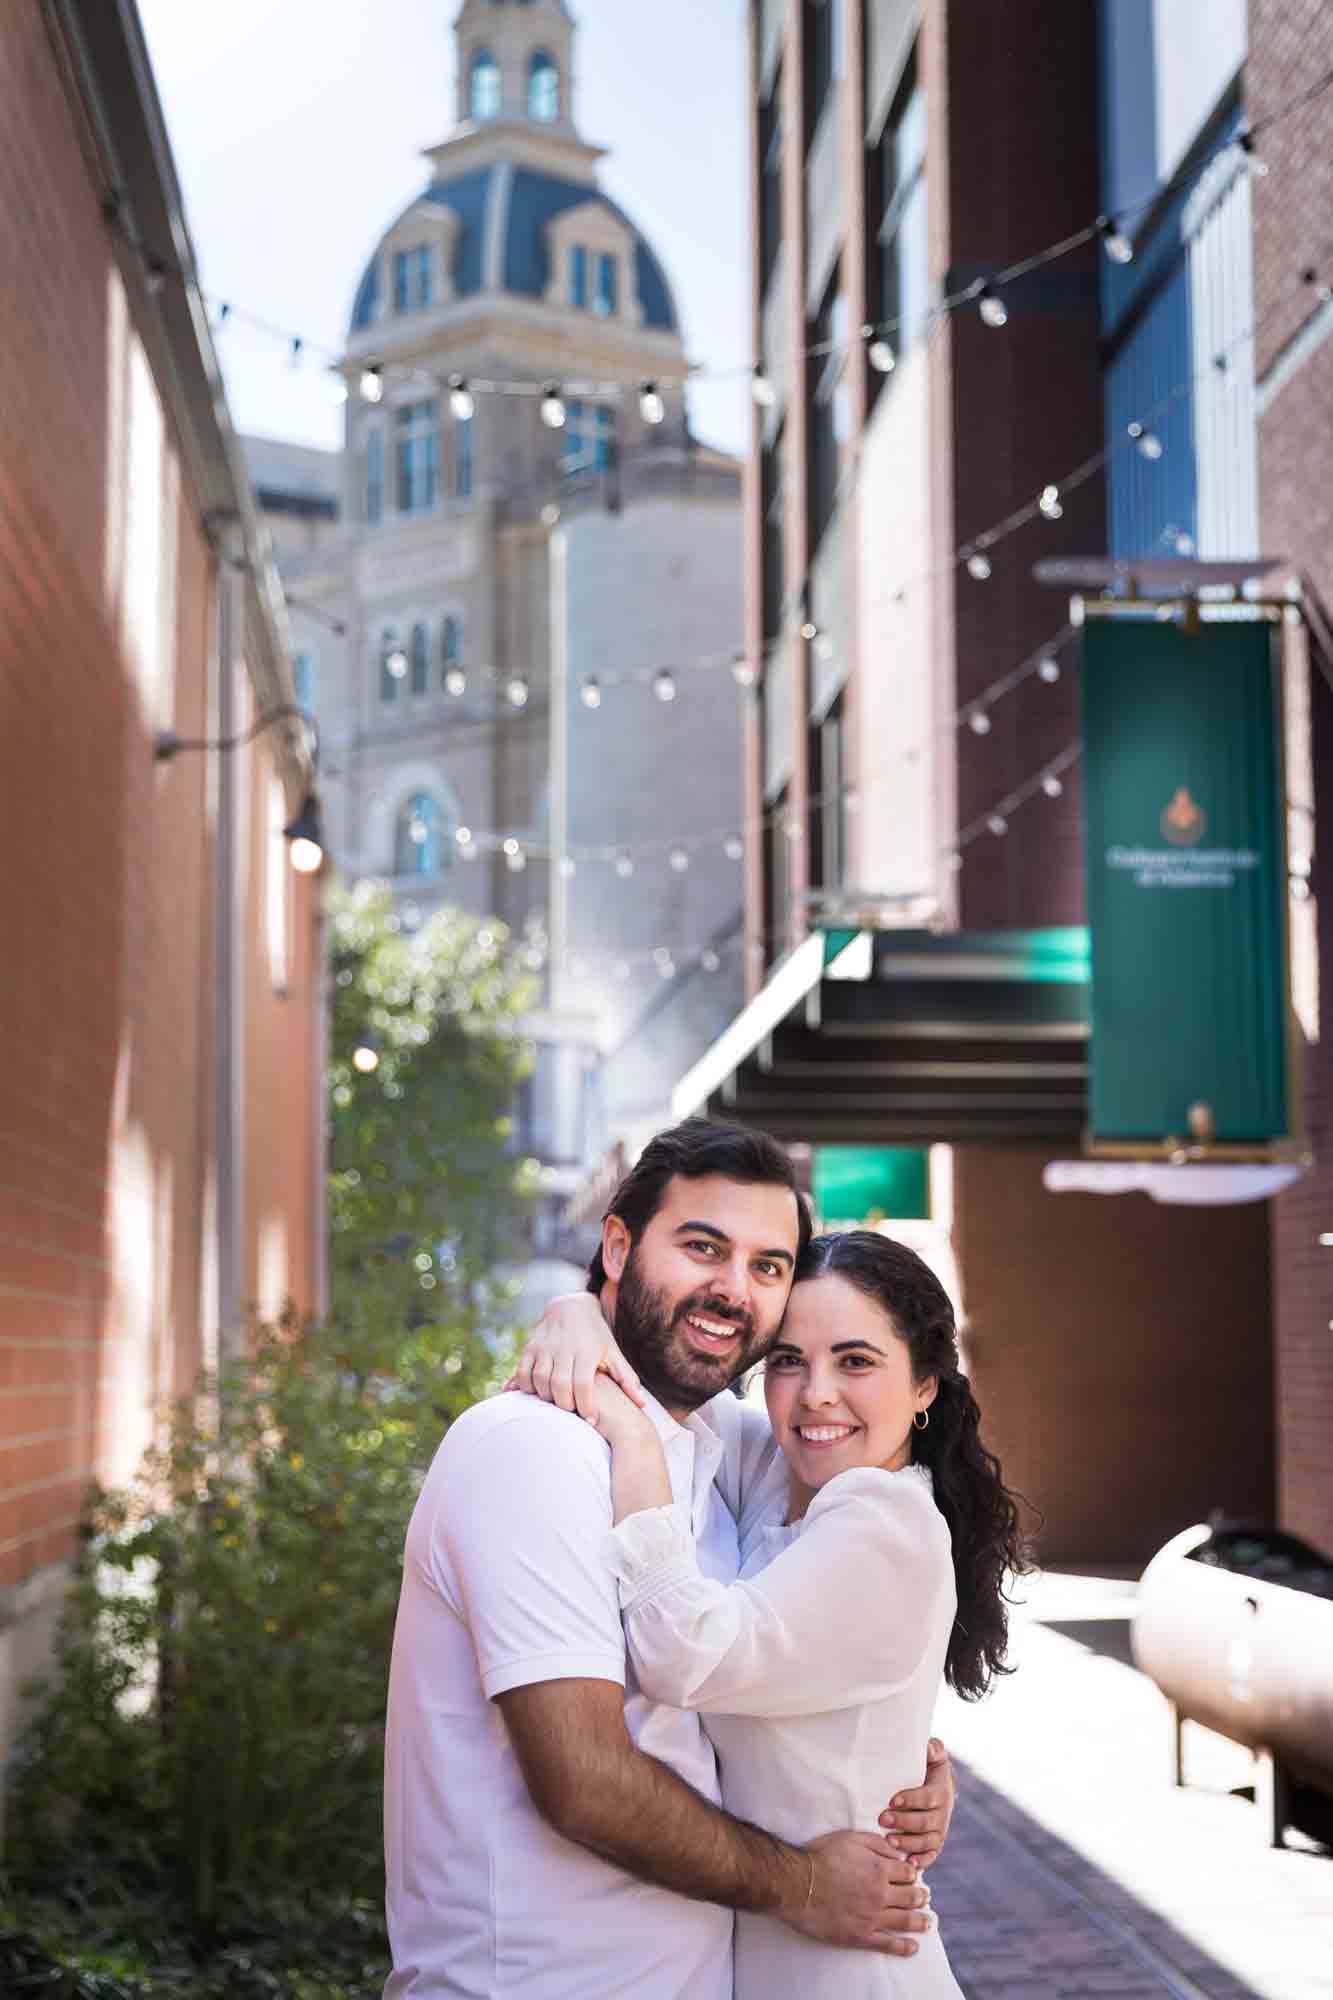 Couple hugging in alleyway with string lights and Pearl Brewery Building in background during a Pearl engagement portrait session